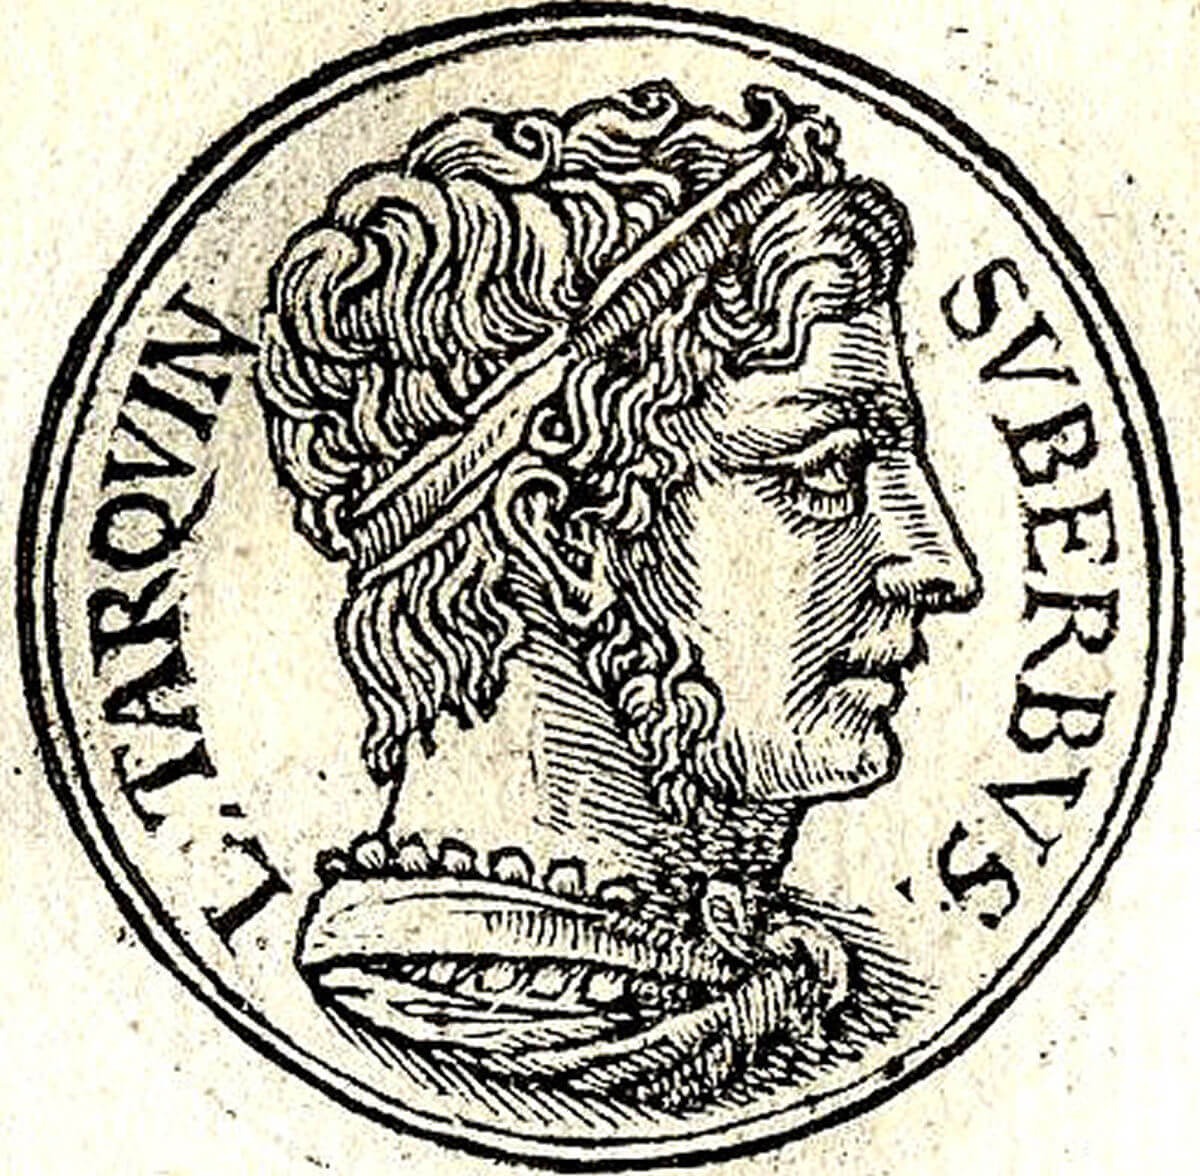 A drawing of a coin featuring the Roman king Lucius Tarquinius Superbus